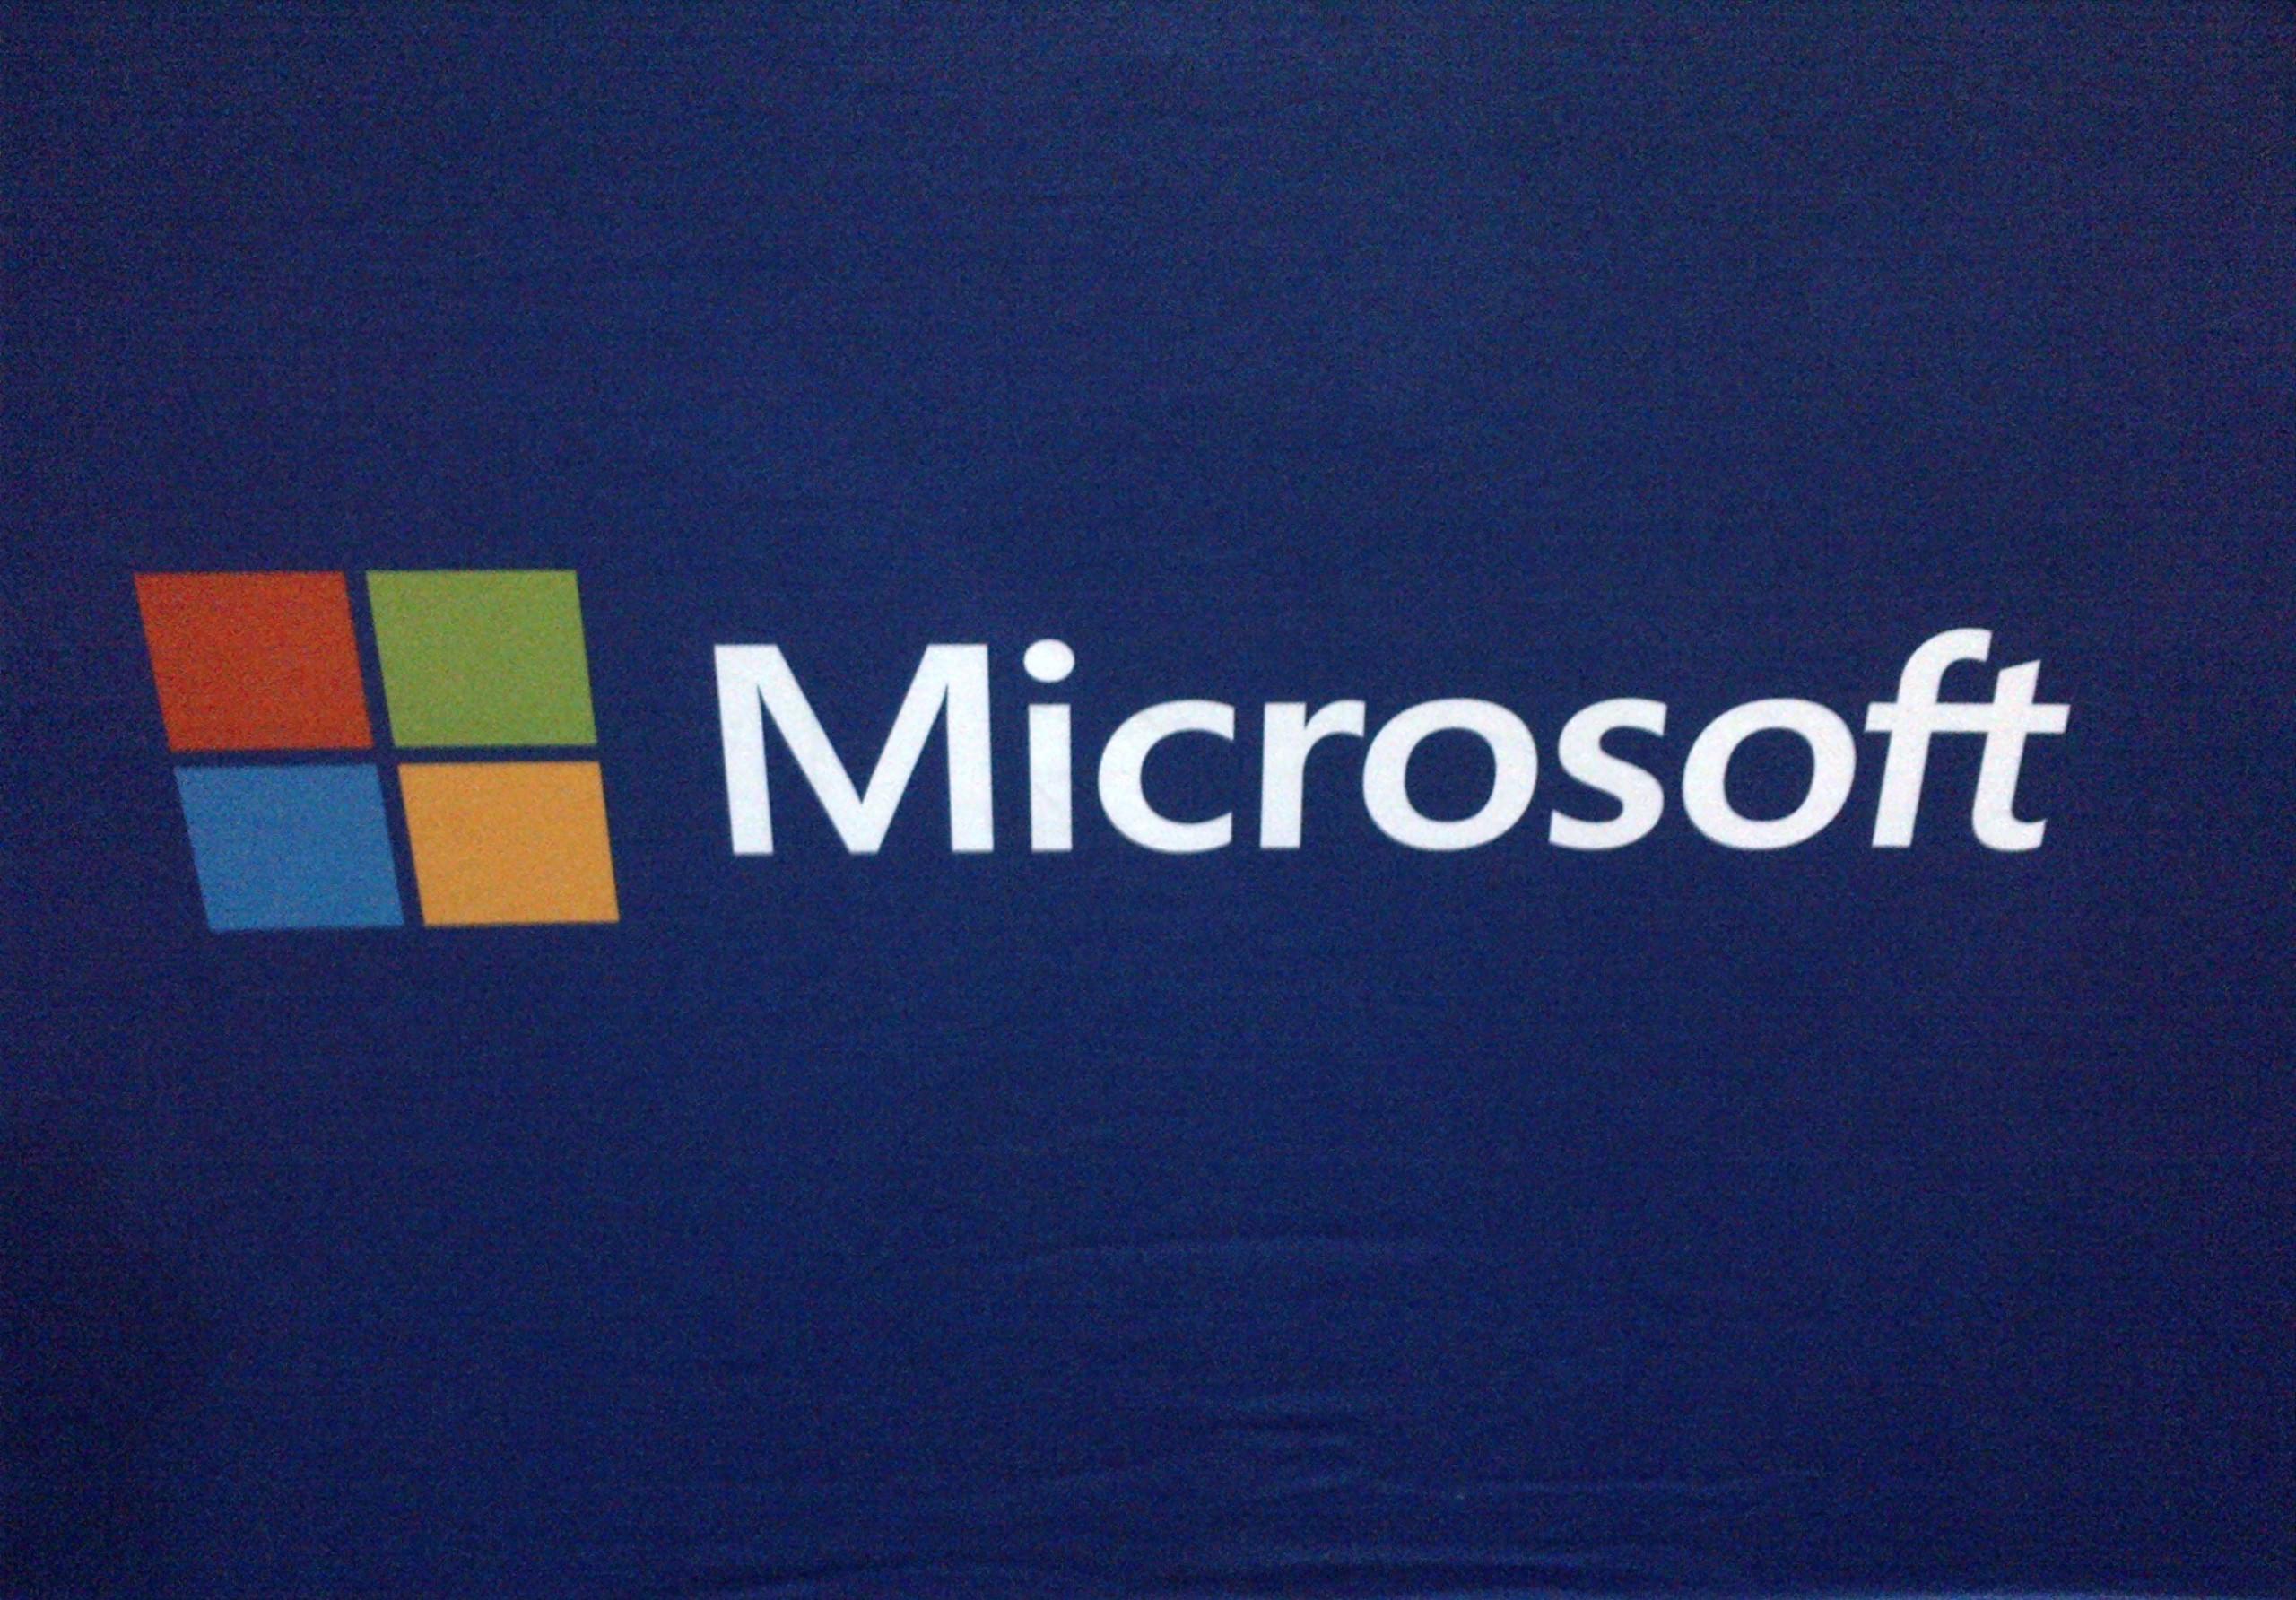 Microsoft at Channel Partners – “We’re Partner-Friendly”